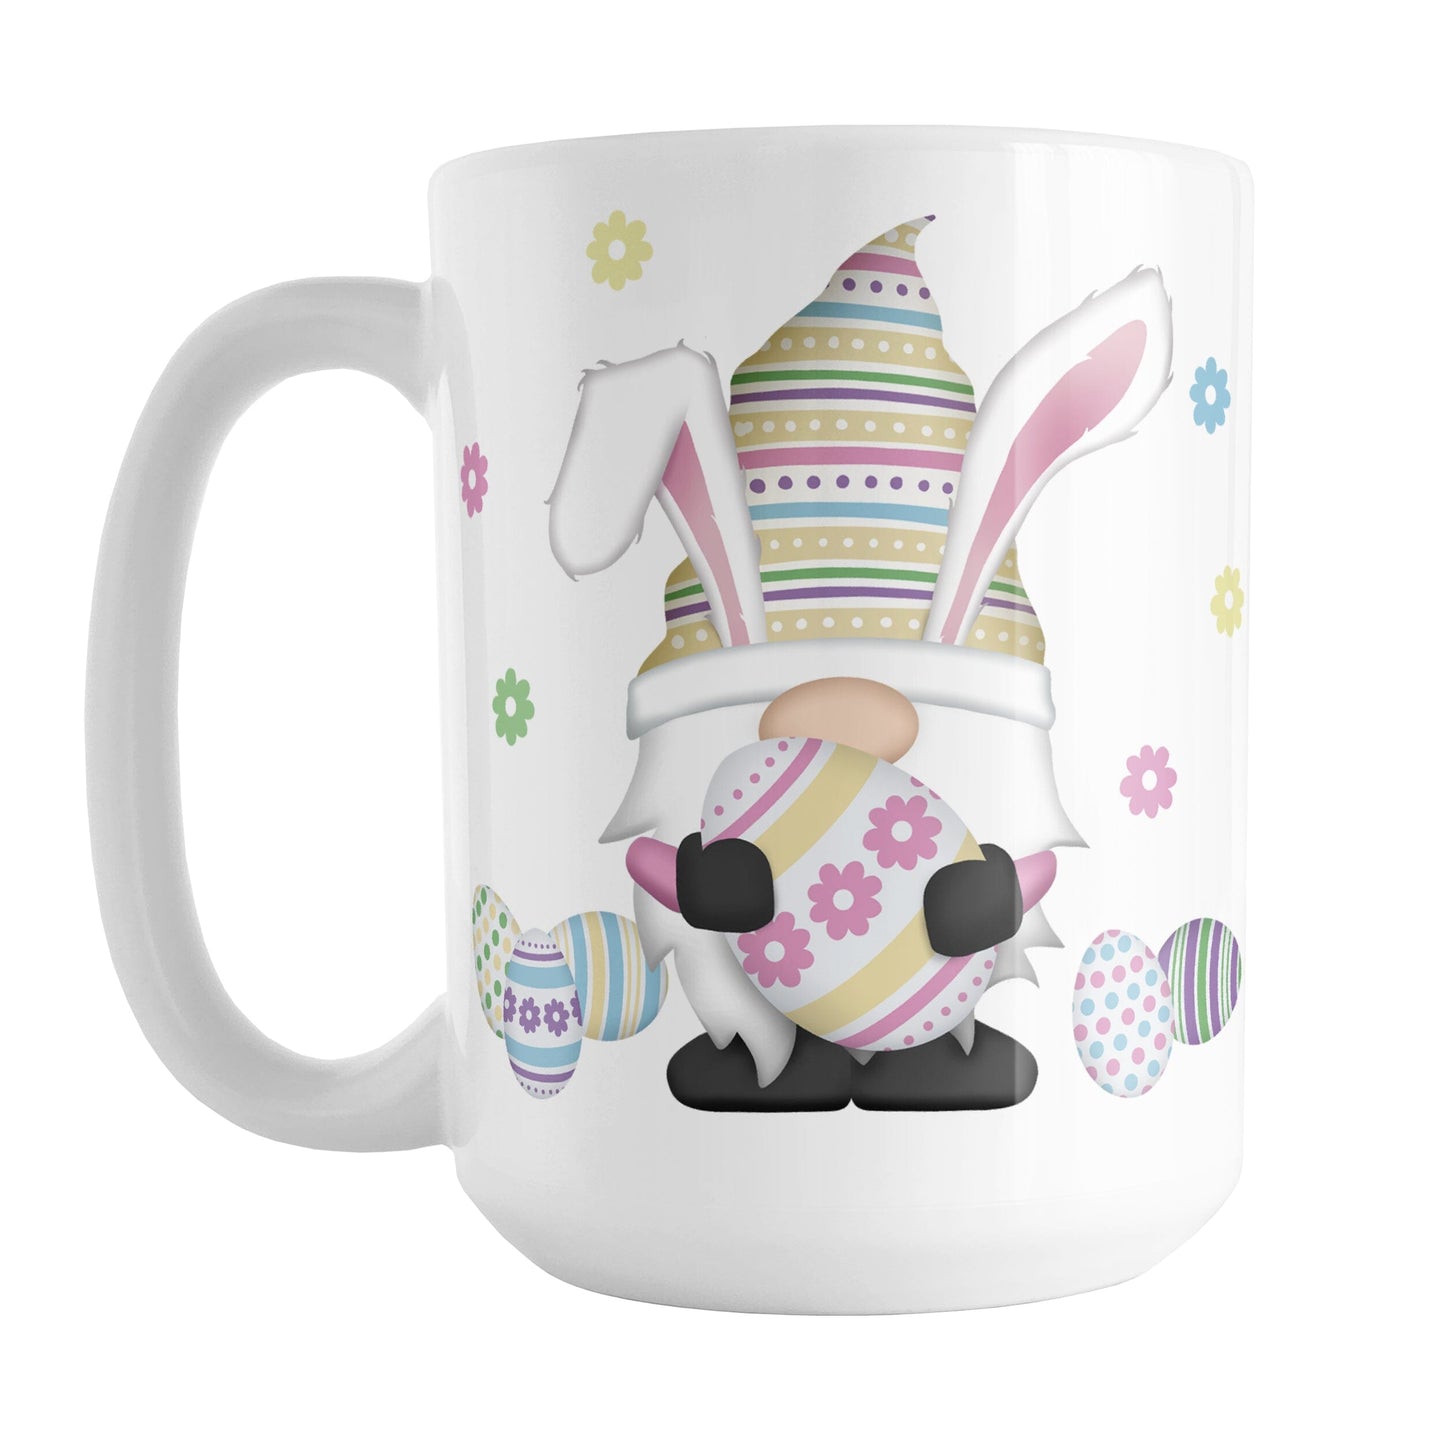 Easter Eggs Bunny Gnome Mug (15oz) at Amy's Coffee Mugs. A ceramic coffee mug designed with an adorable gnome with bunny ears and holding a large Easter egg. Colorful little Easter eggs lay on the ground beside him with little flowers floating around.